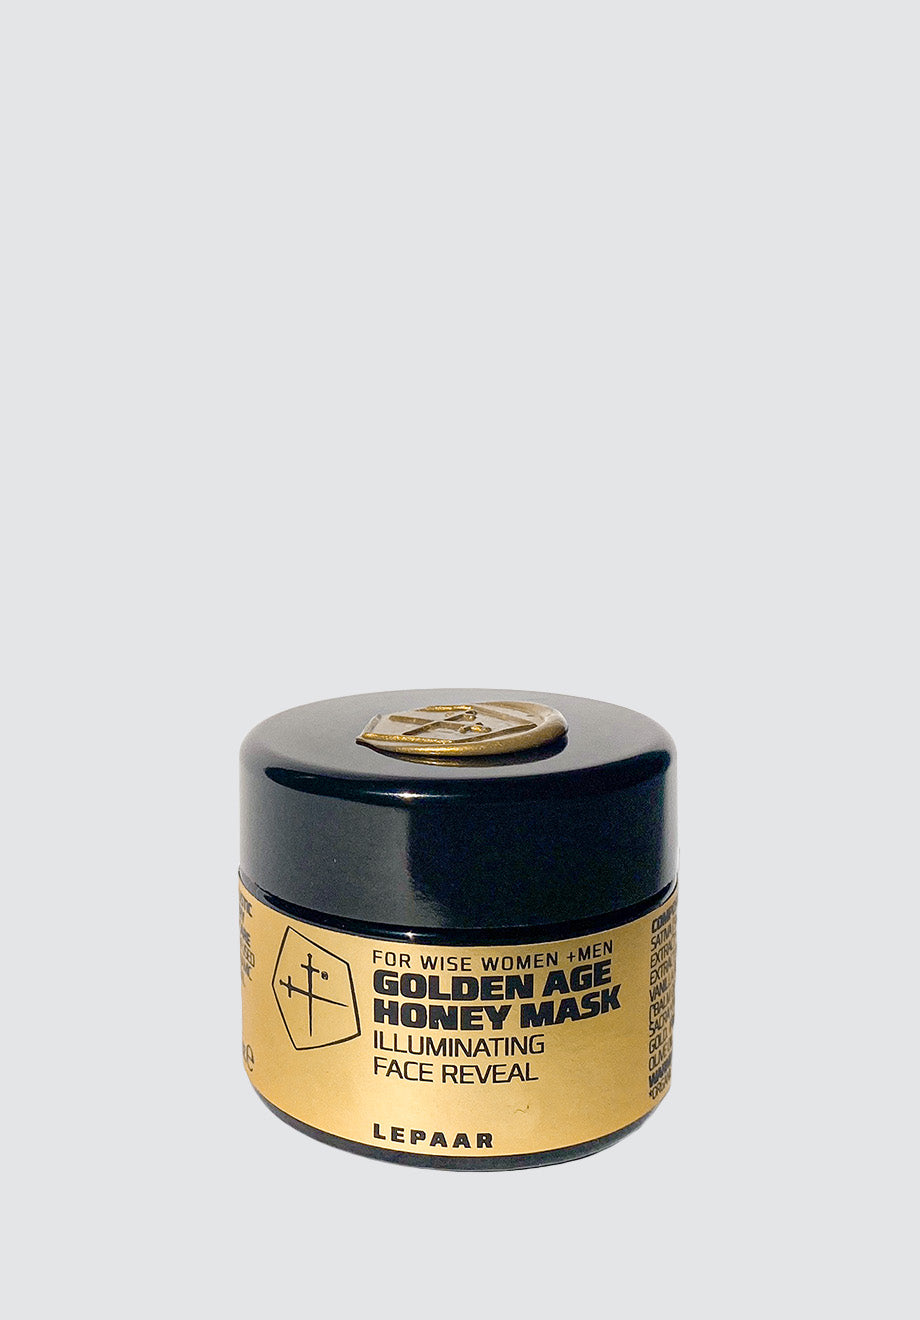 Golden Age Honey Mask | Enzymatic Face Reveal